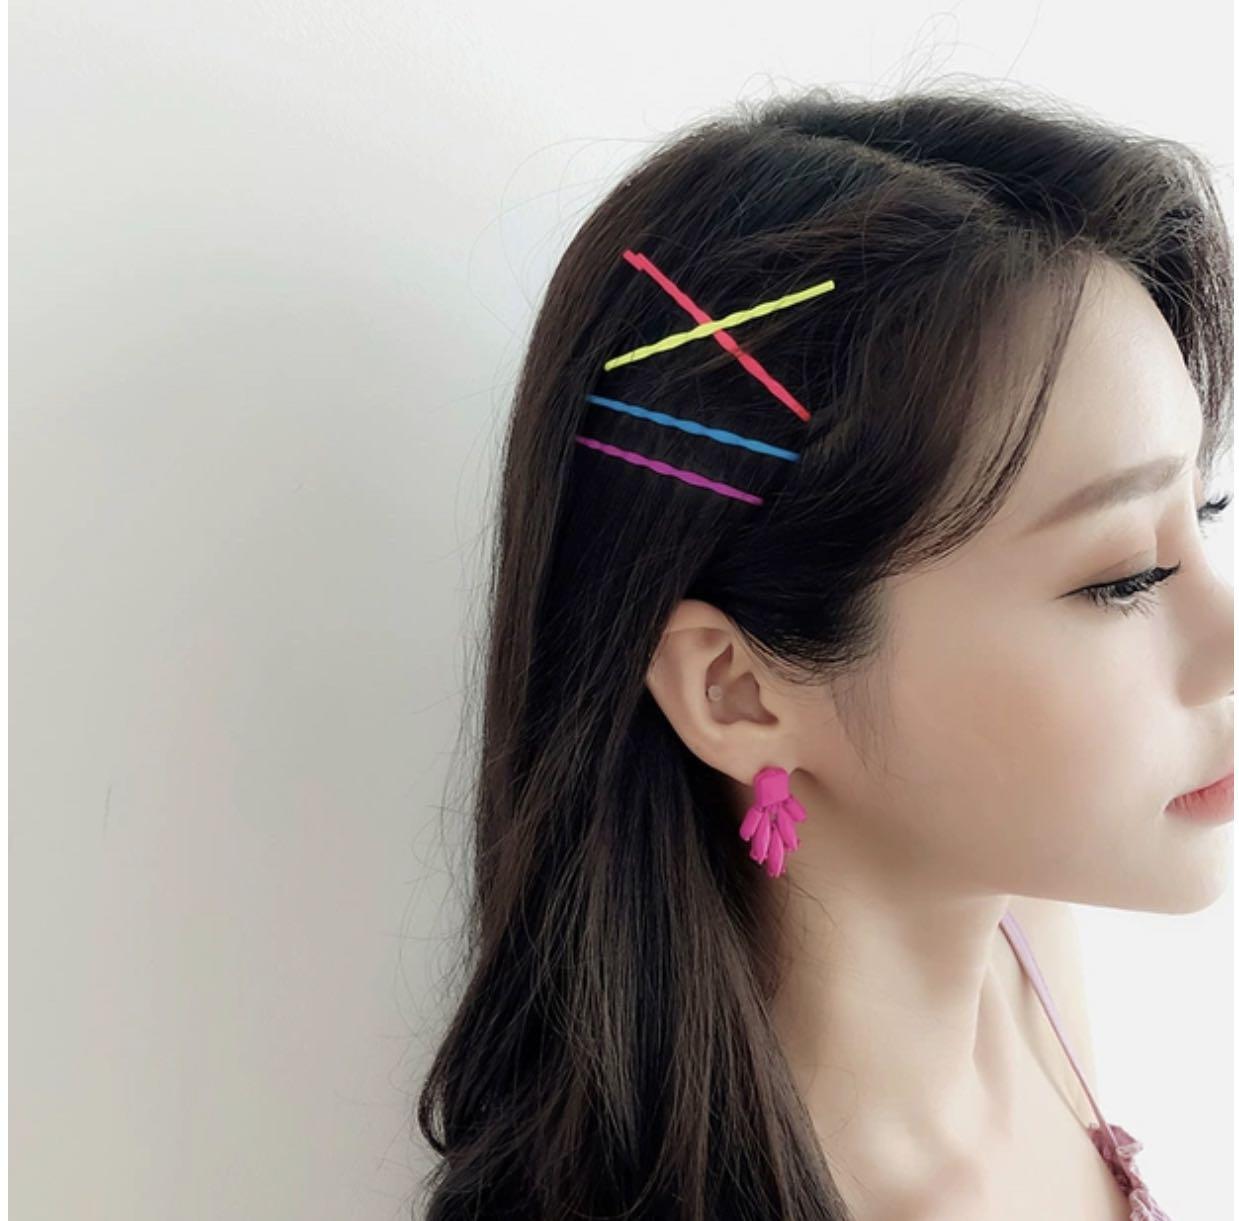 Buy Belicia Colored Hair Bobby Pins  100 Count Hair Clips  Hair Pins for  Kids Girls and Women Great for All Types 216 Inches Multicolor  Online at Low Prices in India  Amazonin